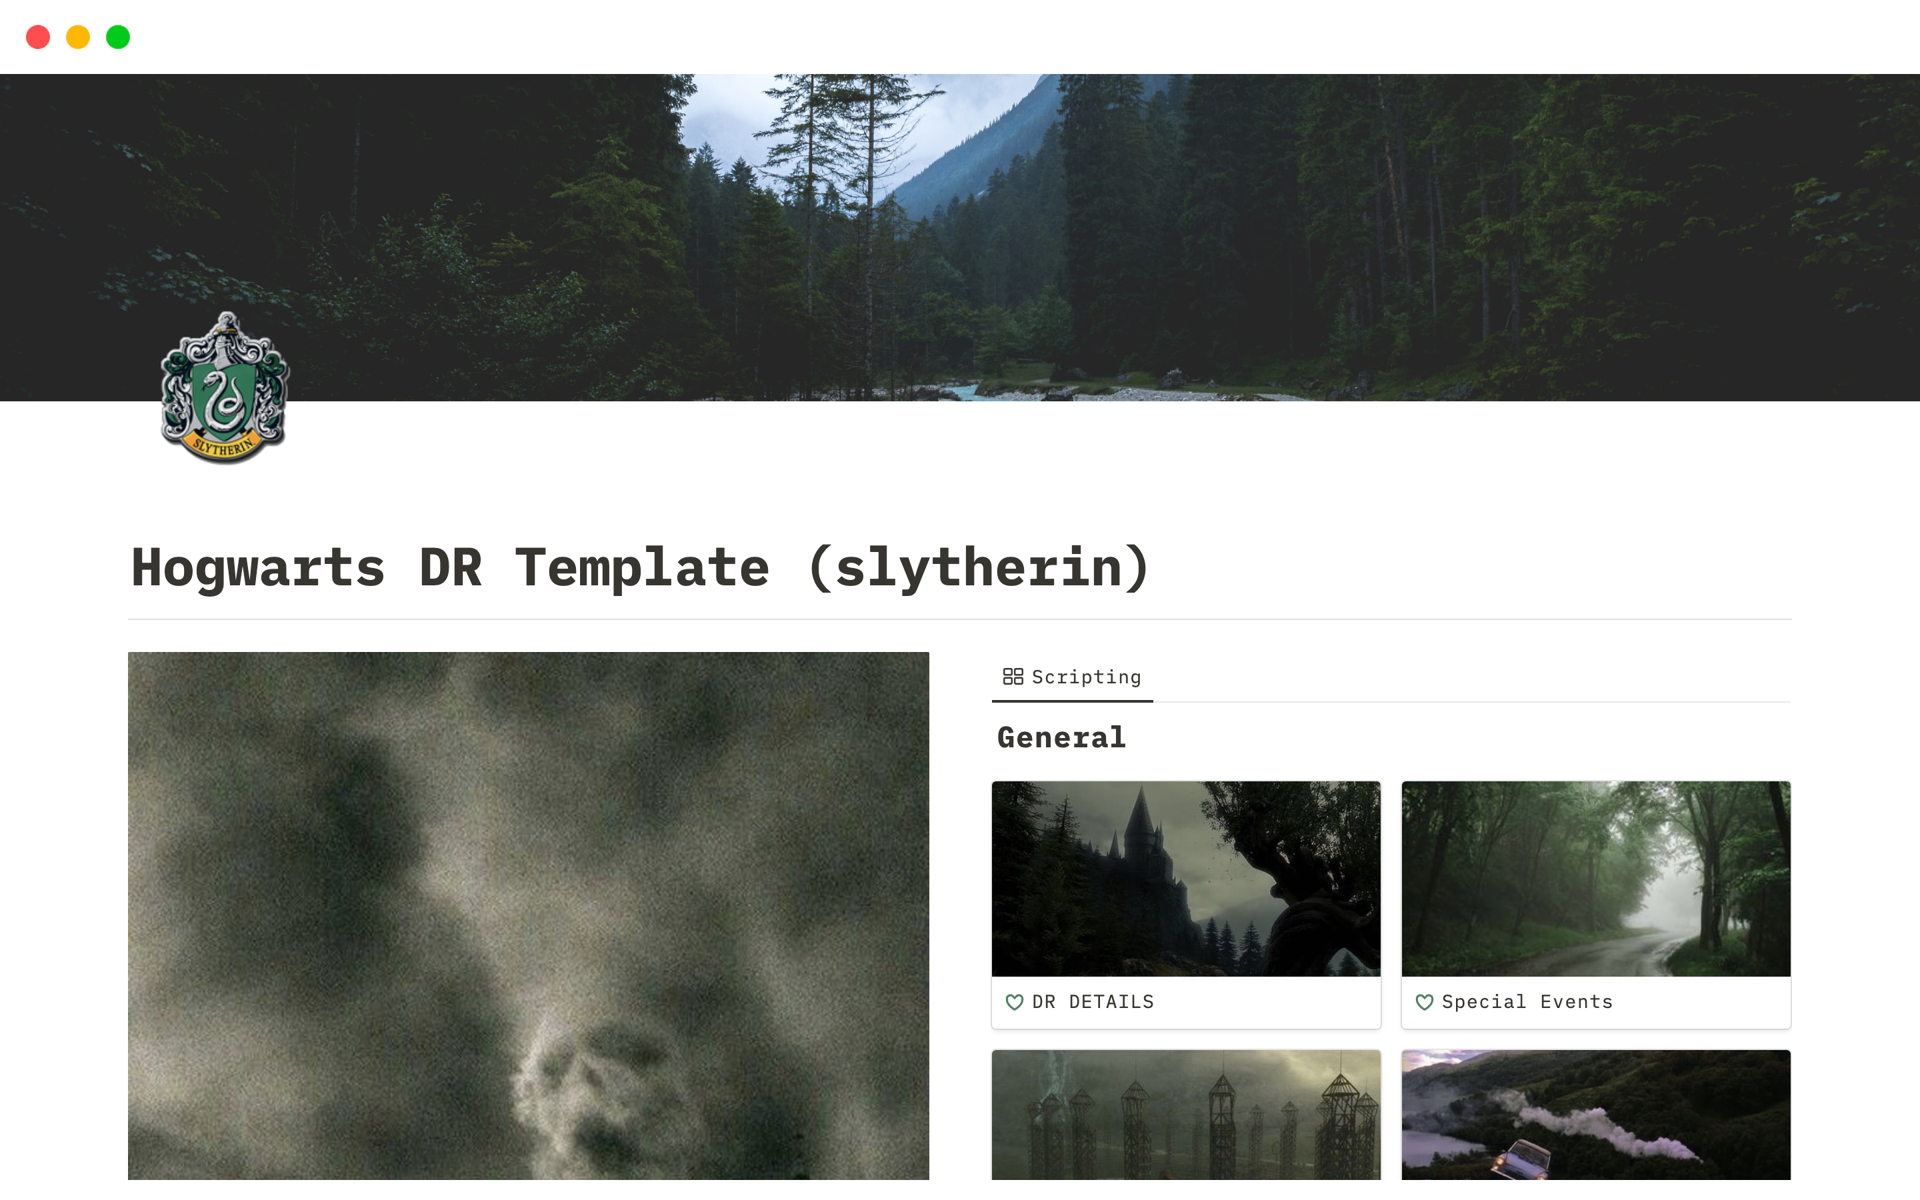 A template preview for Hogwarts DR Template (slytherin)